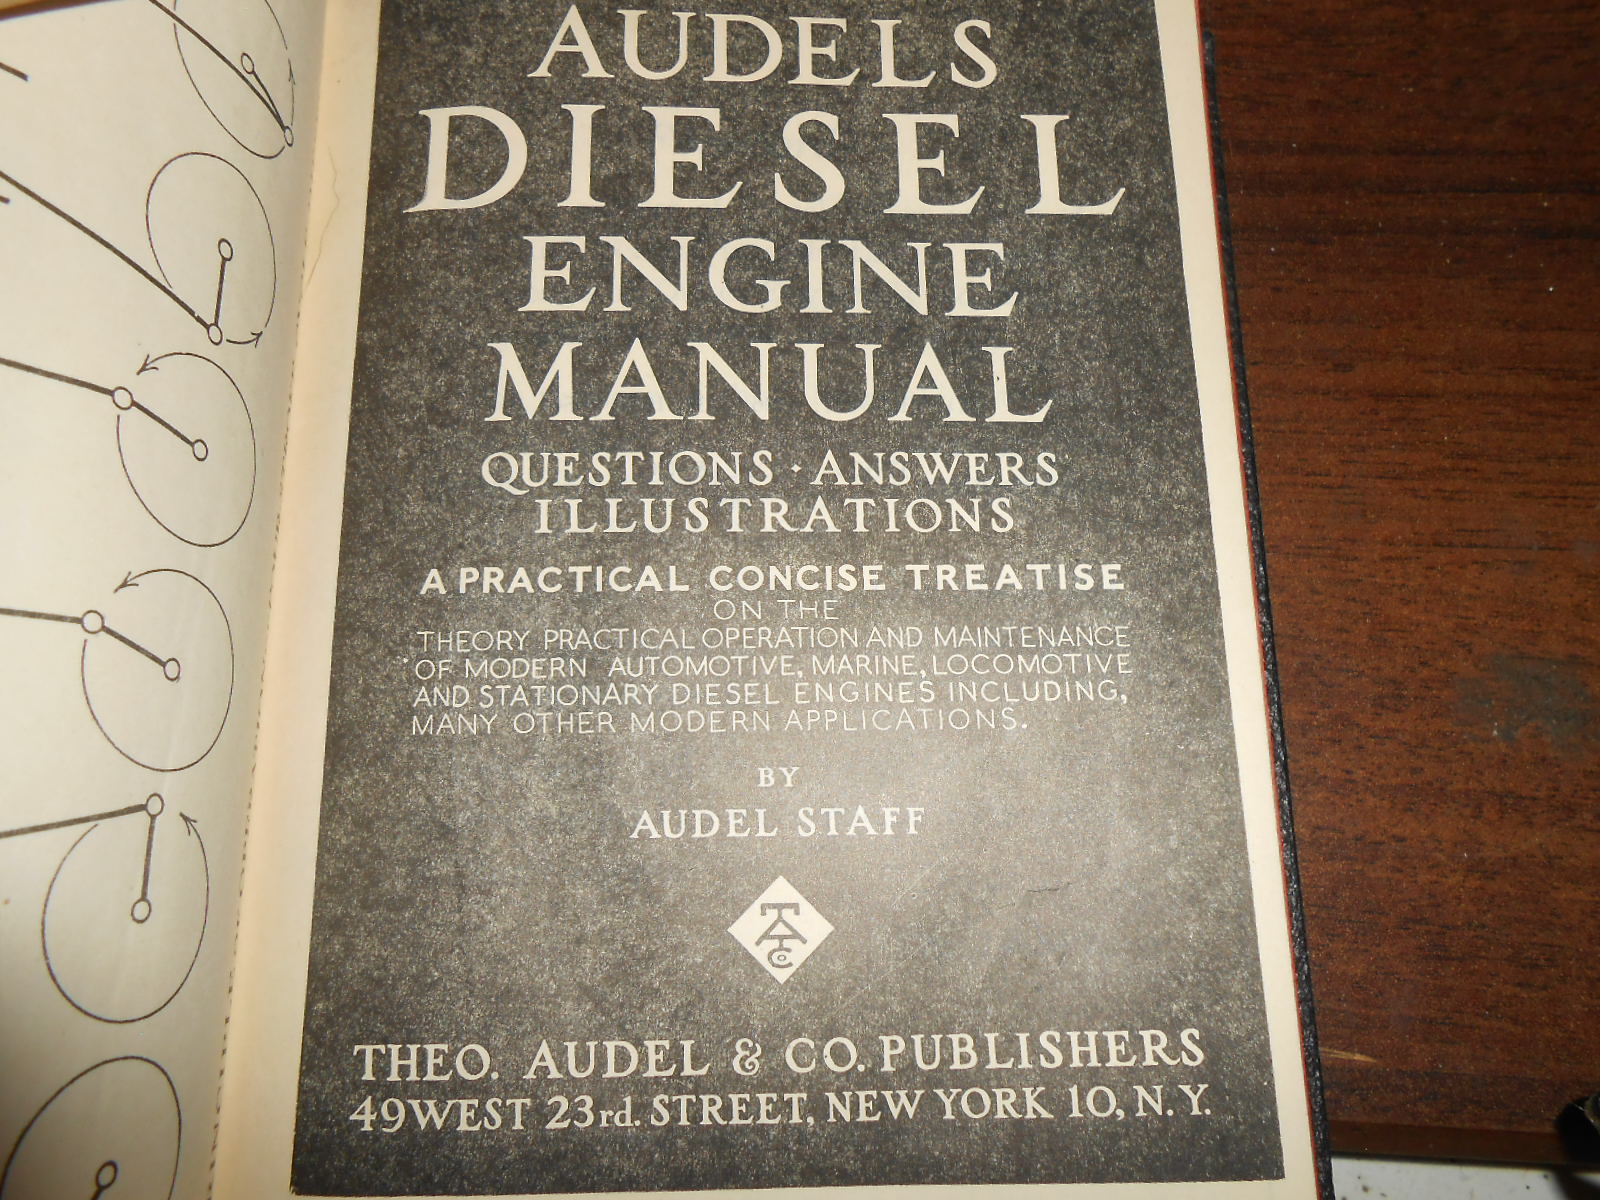 Audels Diesel Engine Manual; A Practical, Concise Treatise On The